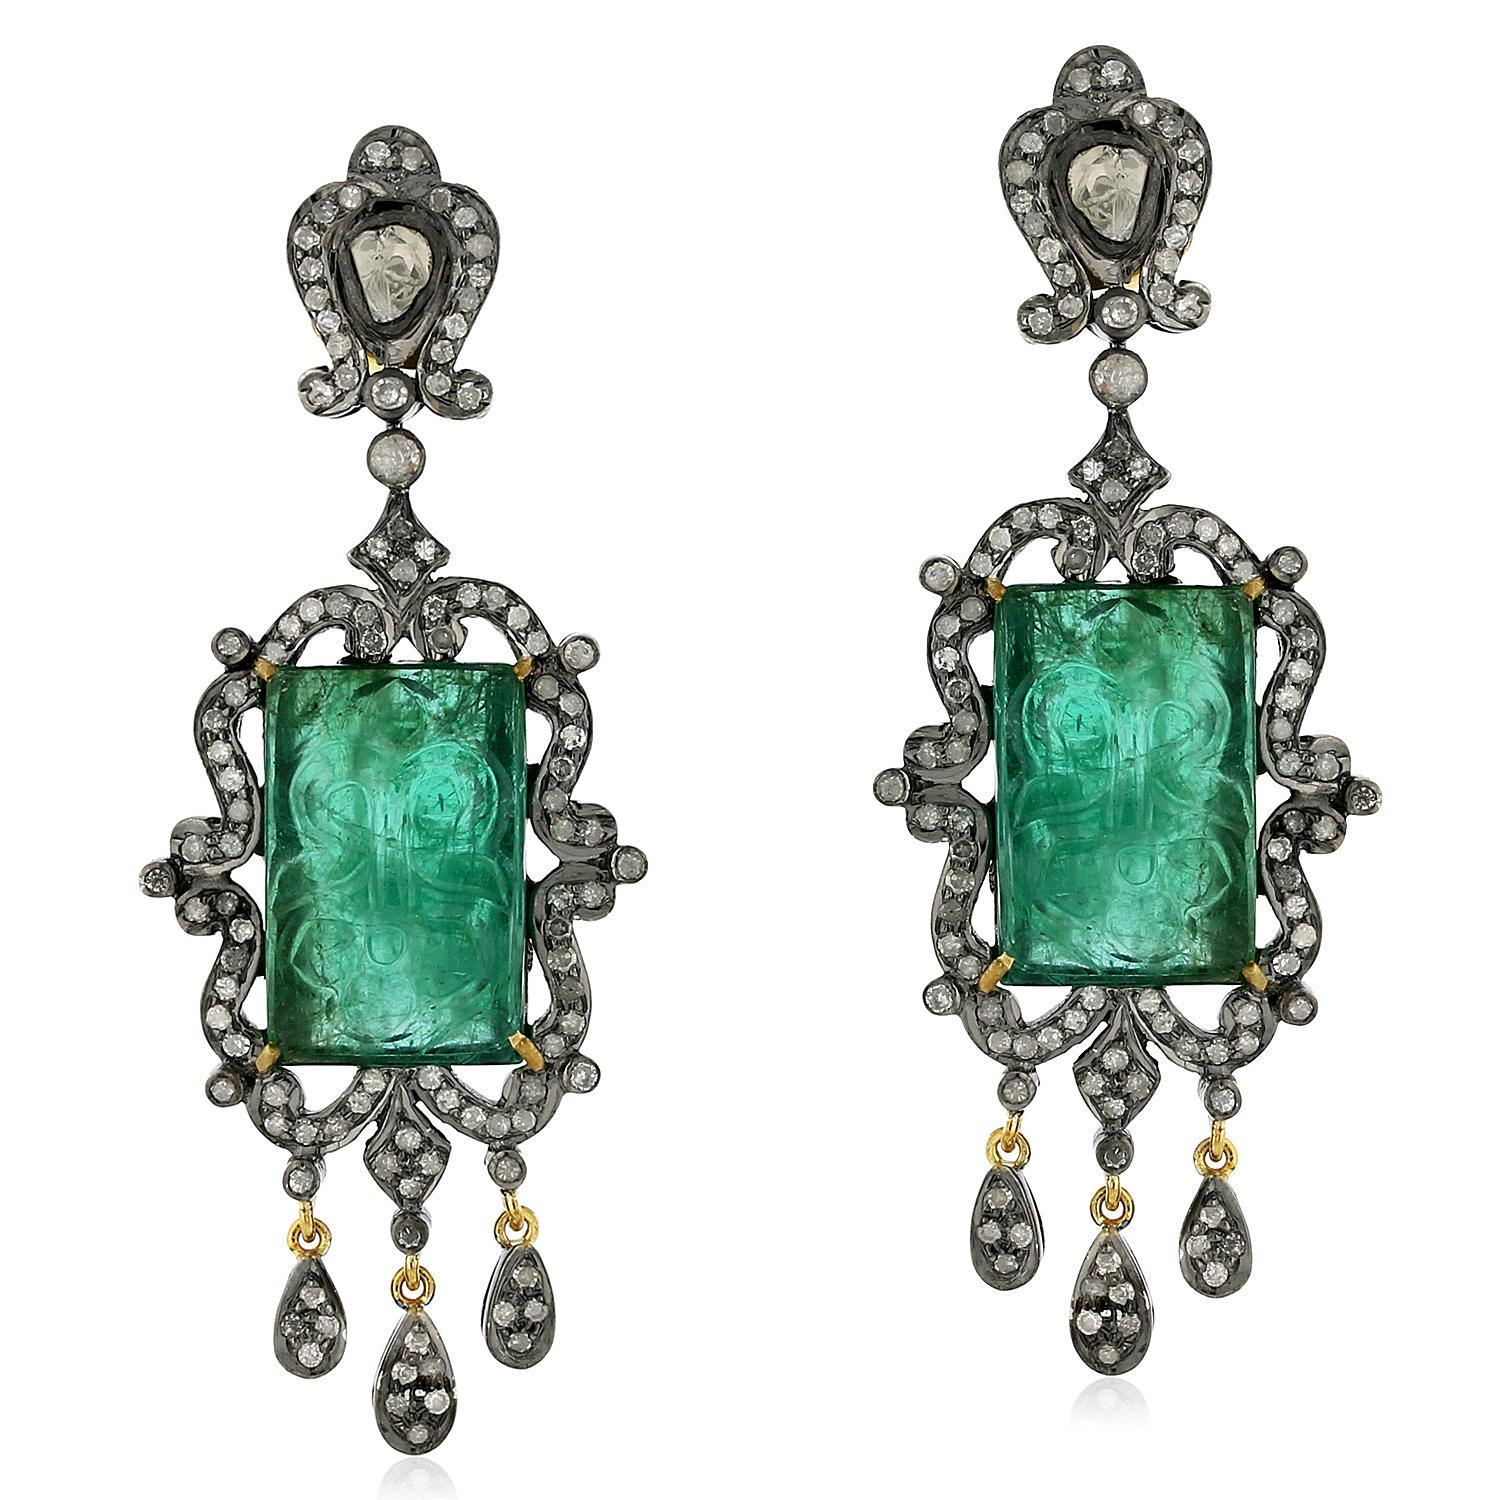 combi baroque-style women's earrings made of sterling silver and 24-carat